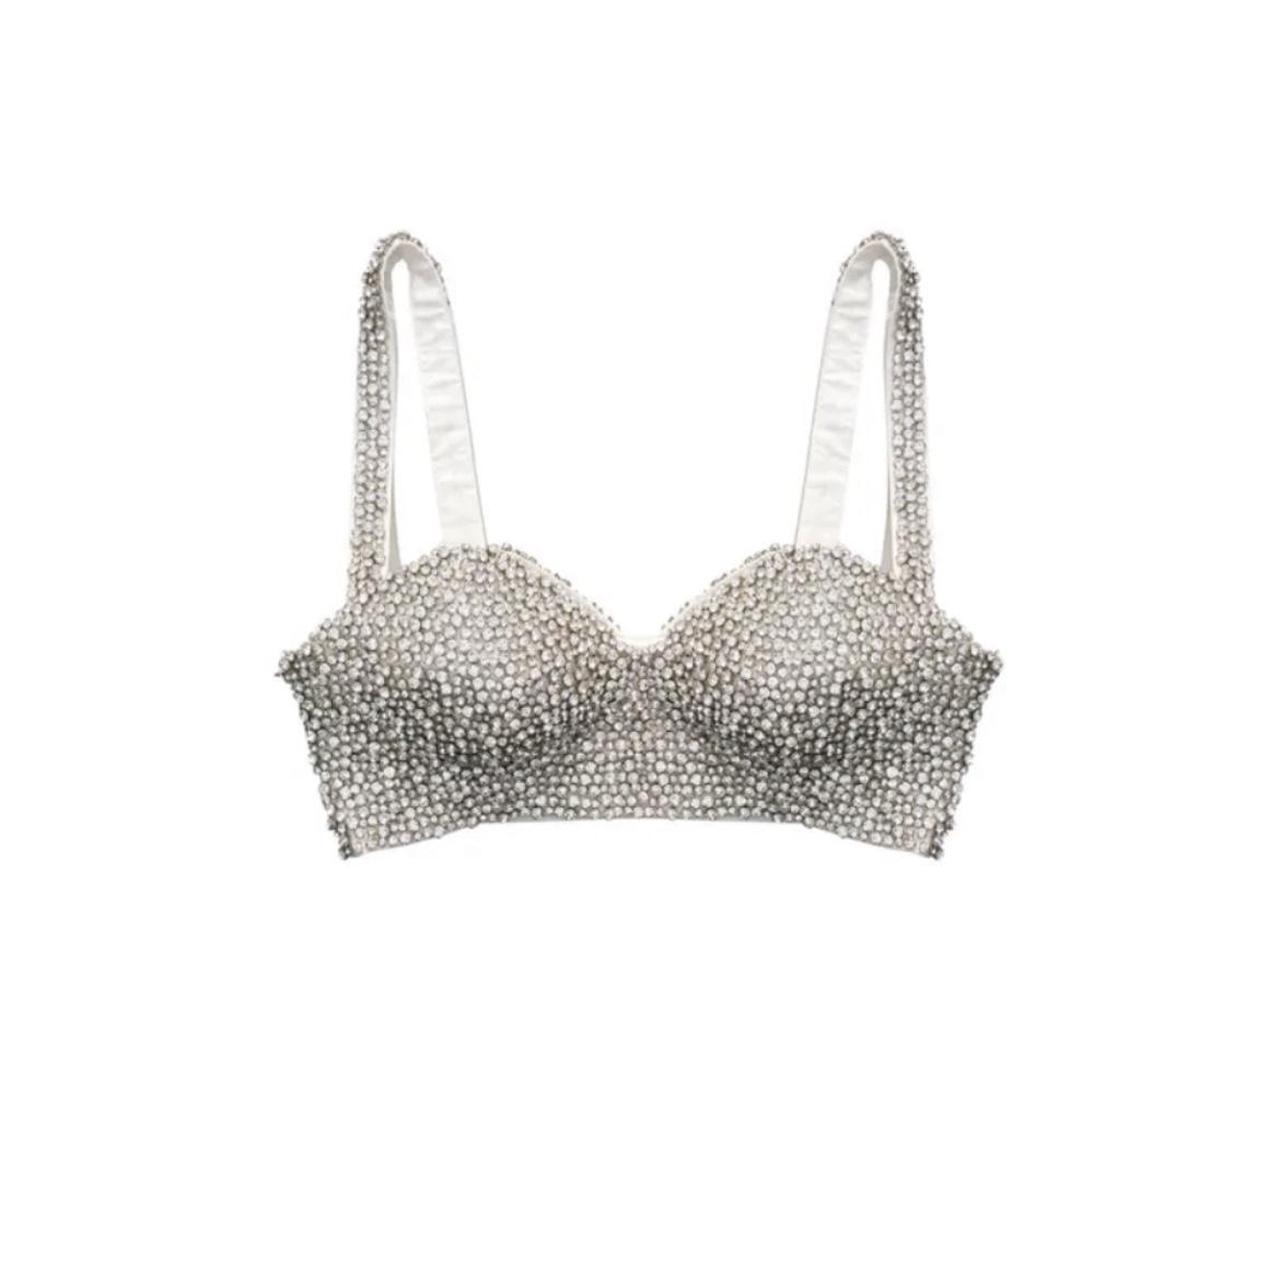 Moschino X H&M crystal bra VERY RARE/OUT OF... - Depop